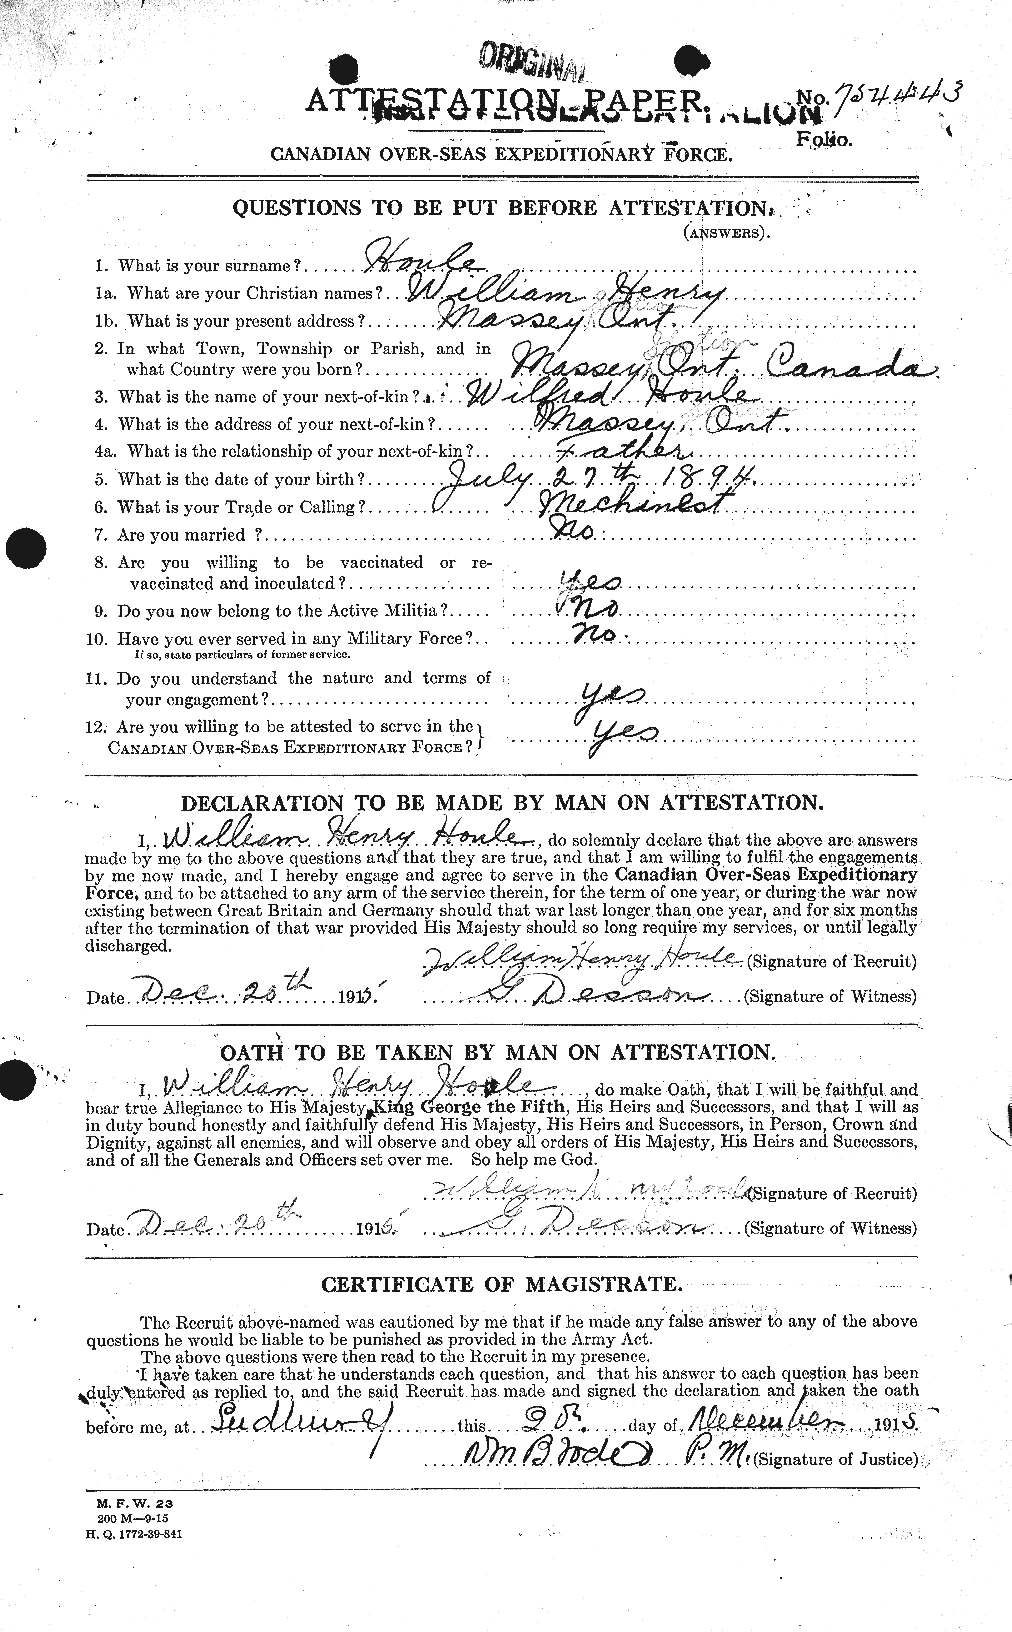 Personnel Records of the First World War - CEF 402319a